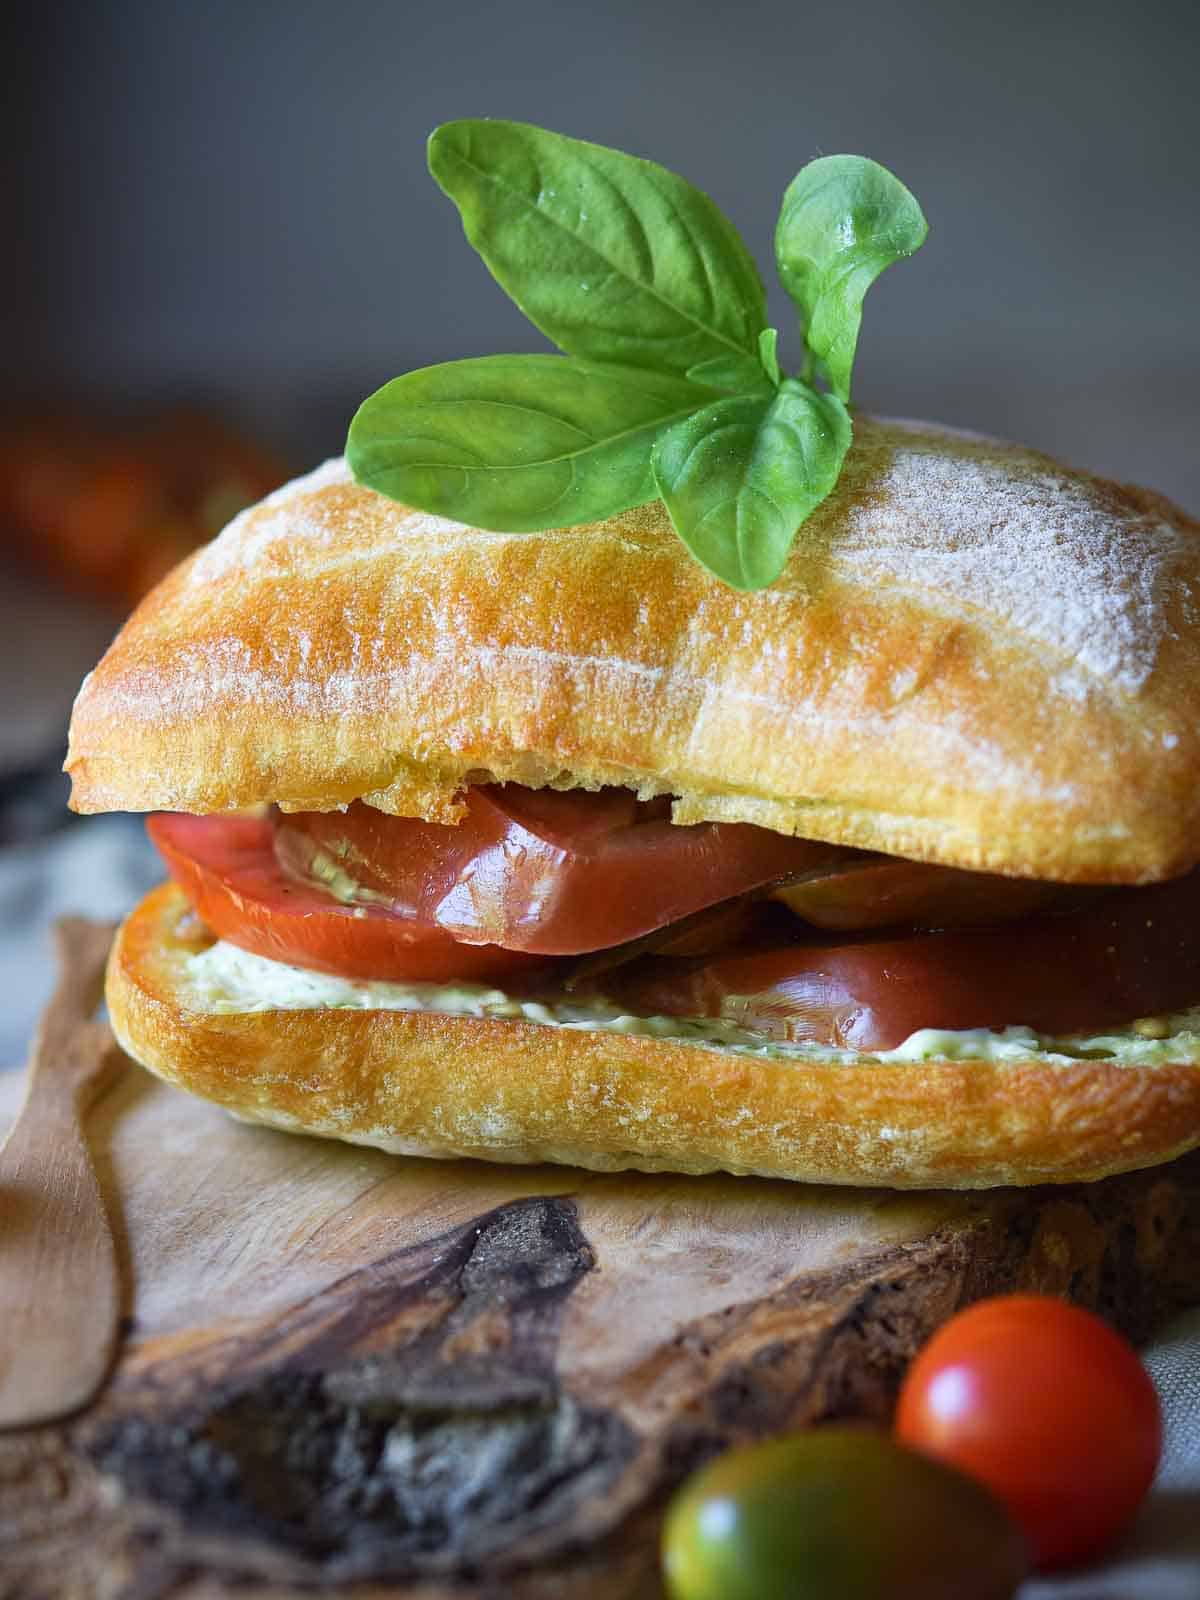 Ciabatta roll with tomatoes and pesto, topped with a few leaves of fresh basil on a wood board.